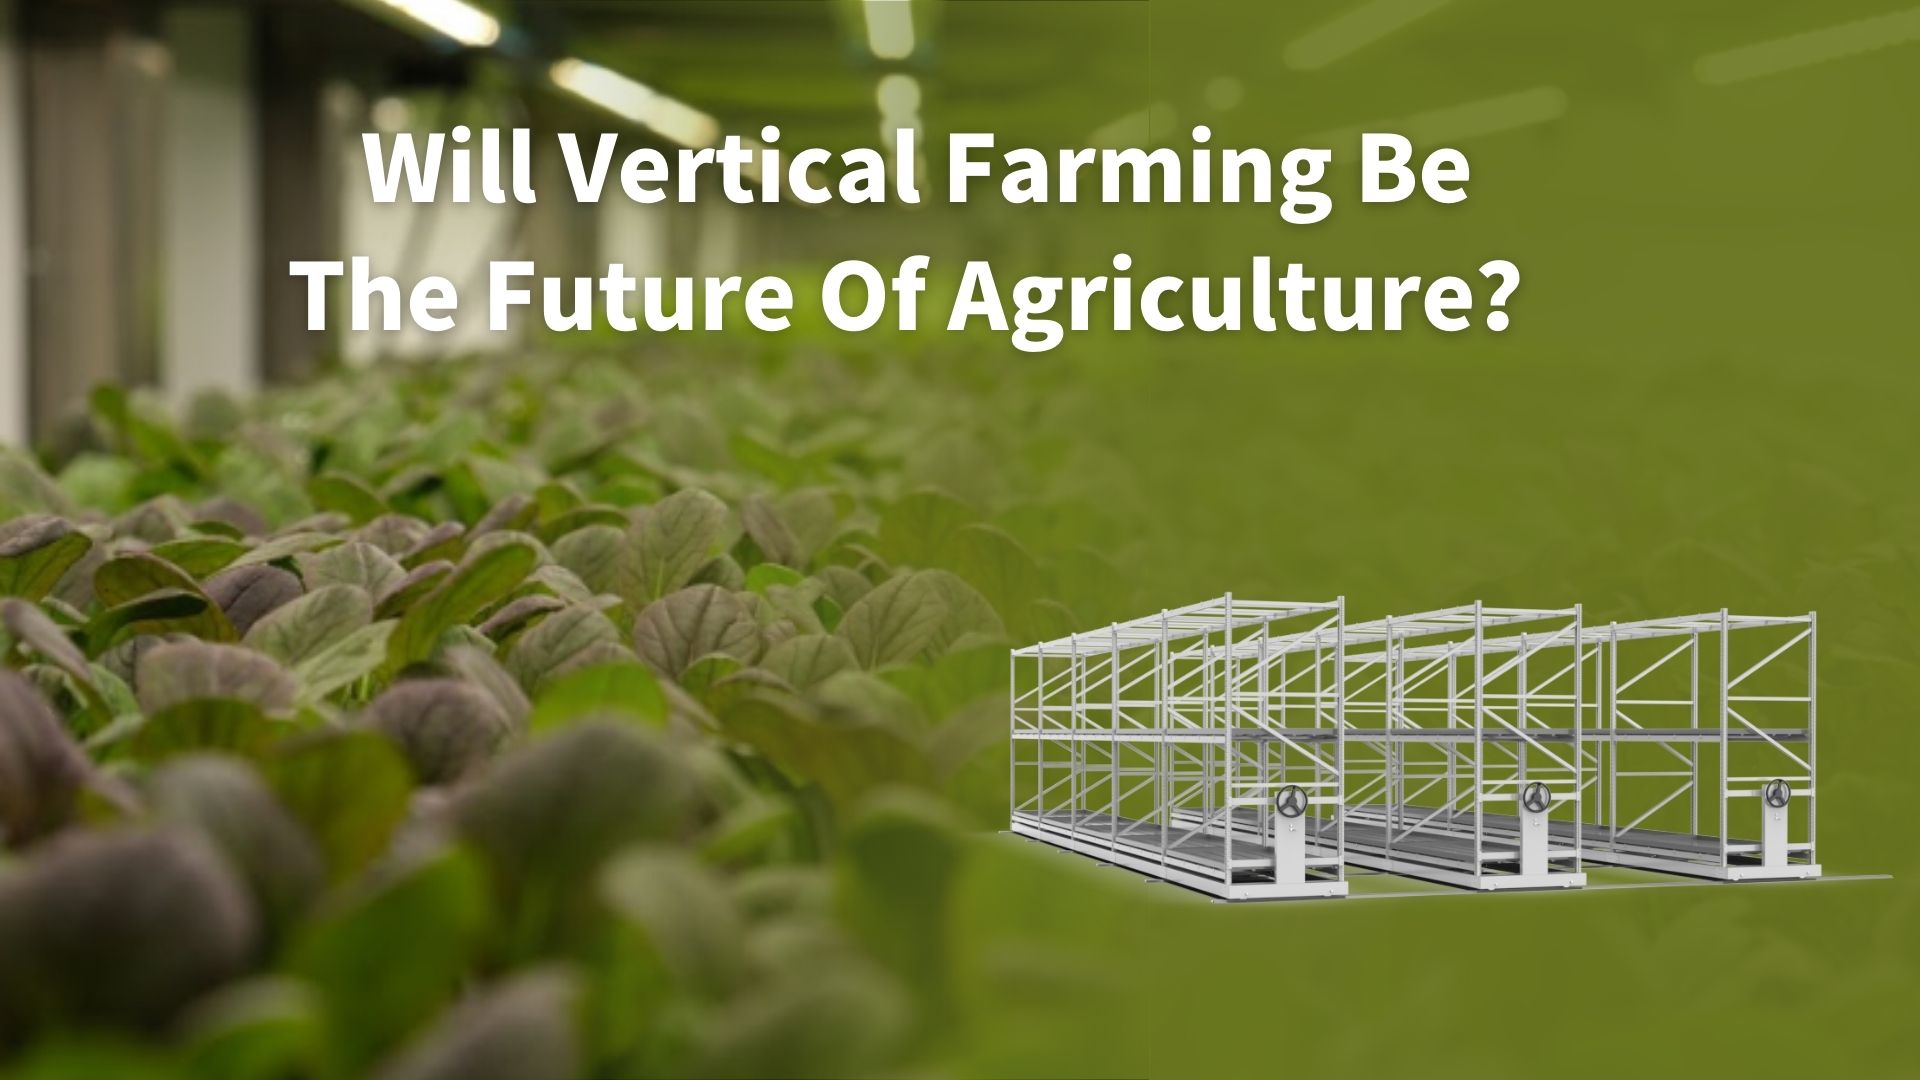 Will Vertical Farming Be the Future of Agriculture?